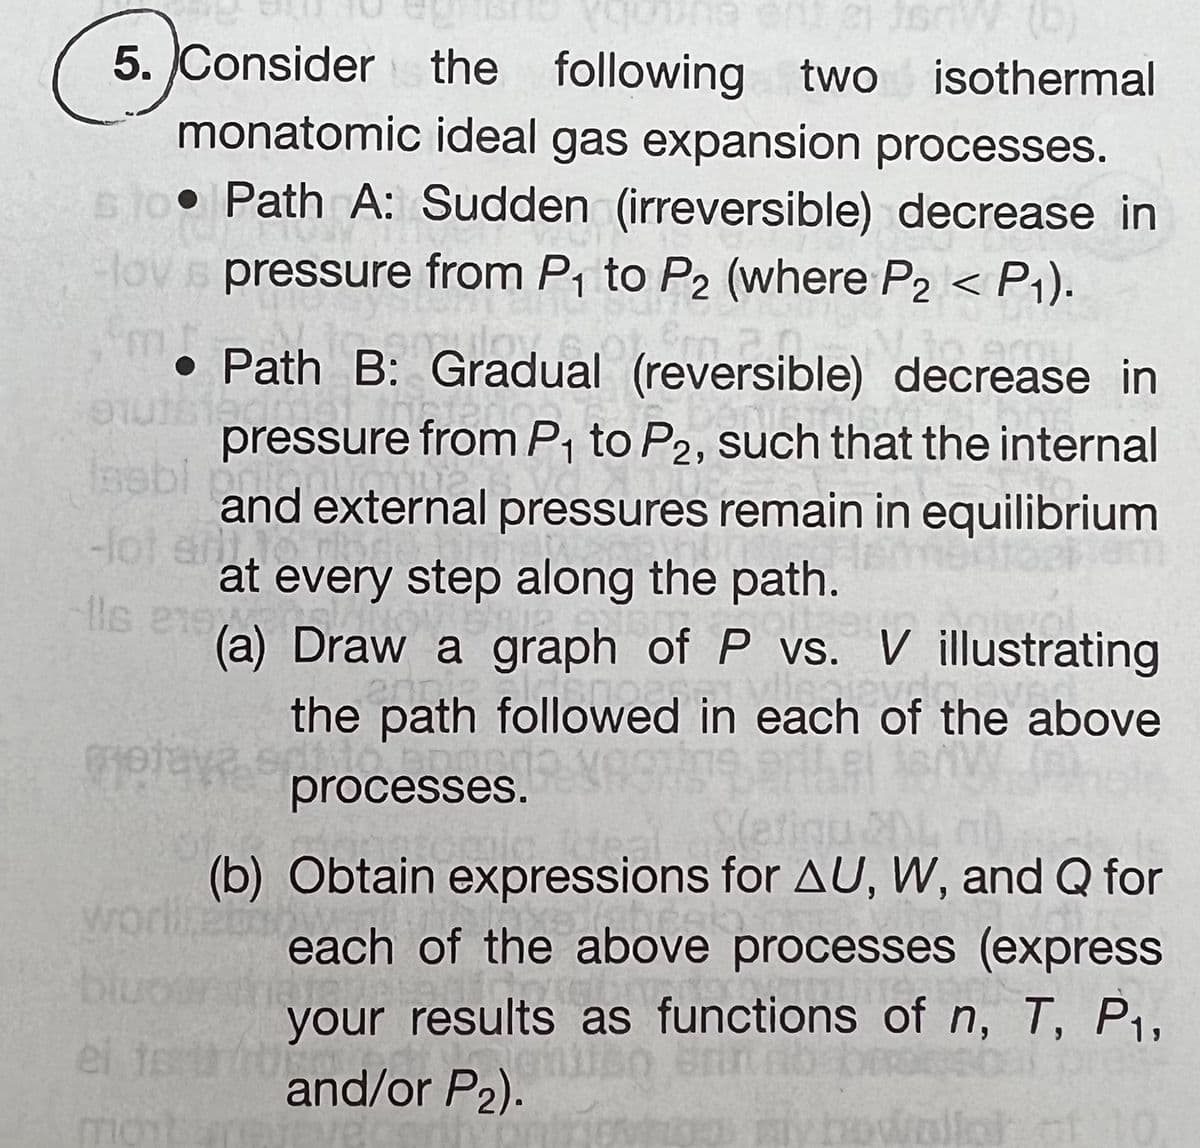 5. Consider the
monatomic ideal gas expansion processes.
510 Path A: Sudden (irreversible) decrease in
Hovs pressure from P₁ to P2 (where P2 < P₁).
Em 201
• Path B: Gradual (reversible) decrease in
outstaamat thaten
pressure from P₁ to P2, such that the internal
sebi pri
and external pressures remain in equilibrium
-lot gril.16
at every step along the path.
Ils ens VEN plas
(quing and e JSW (b)
following
following two isothermal
oitze
(a) Draw a graph of P vs. V illustrating
oth followed in the o
the path followed in each of the above
processes. VRC
moteves processes.
mptay
(b) Obtain expressions for AU, W, and Q for
worllebow
labral
each of the above processes (express
biuos later
your results as functions of n, T, P₁,
and/or P₂).
Brinnos
el to the
montare